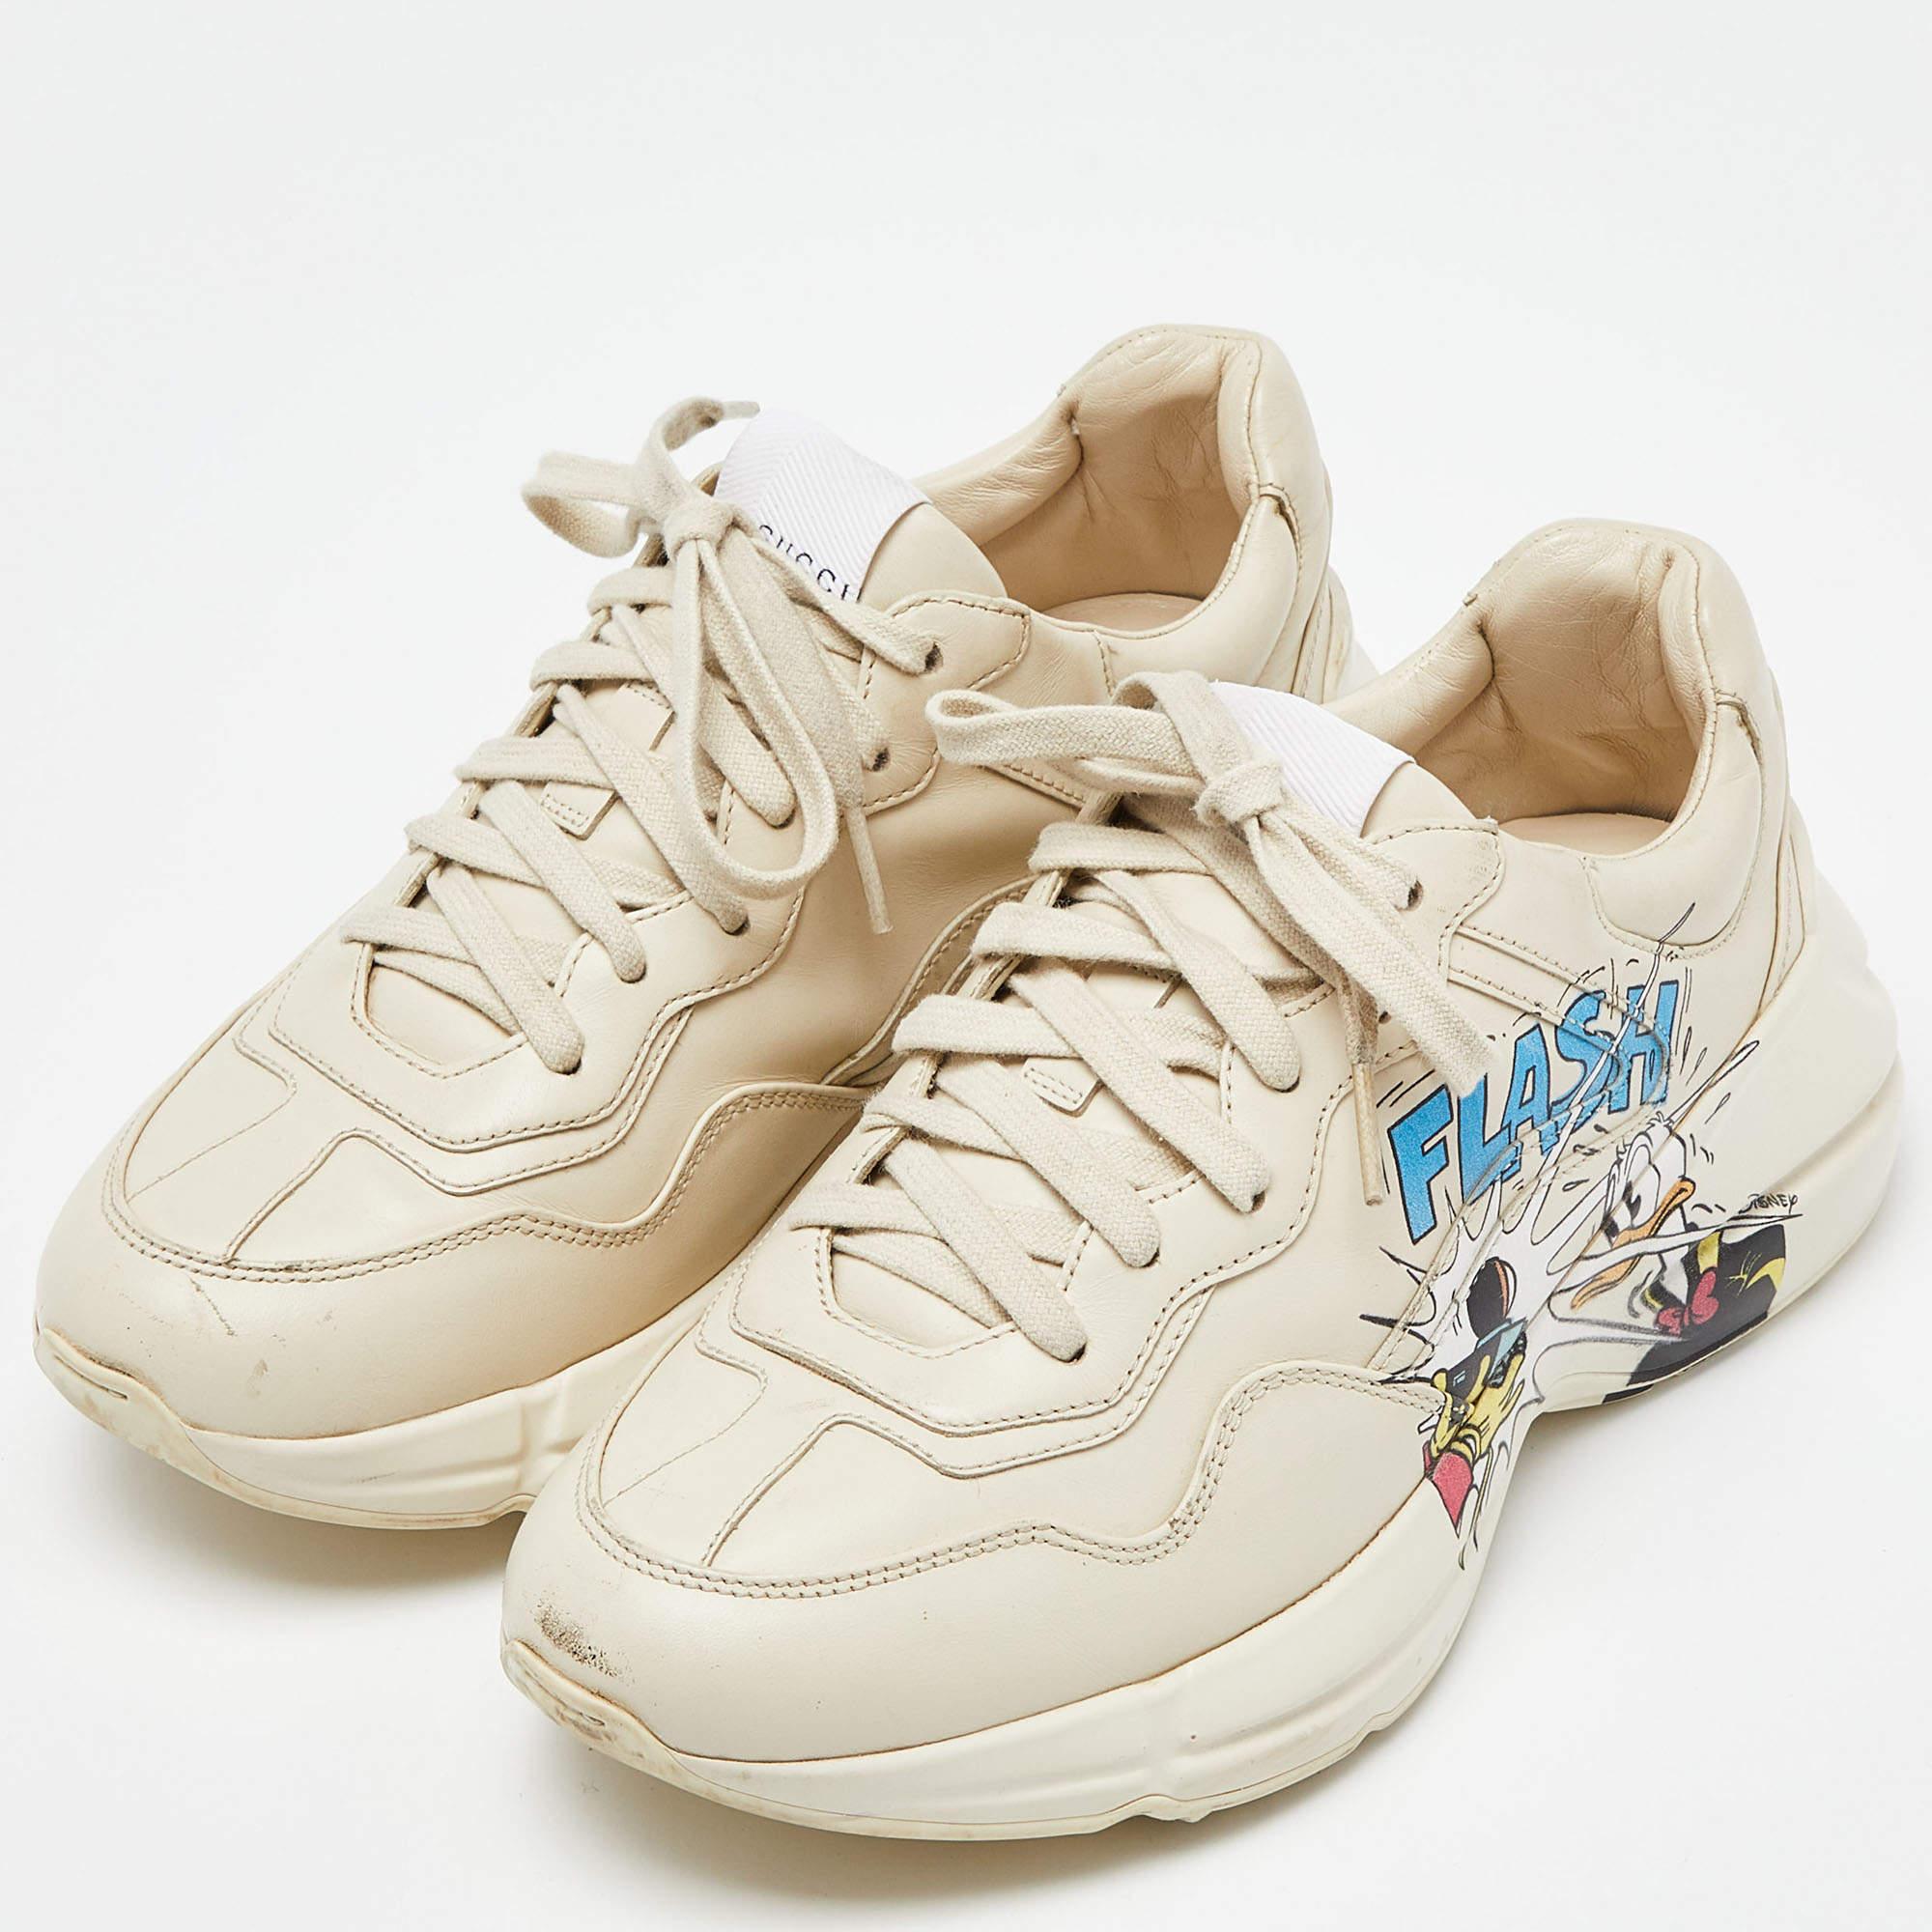 Gucci x Disney Donald Duck Cream Leather Rhyton Sneakers Size 38 1